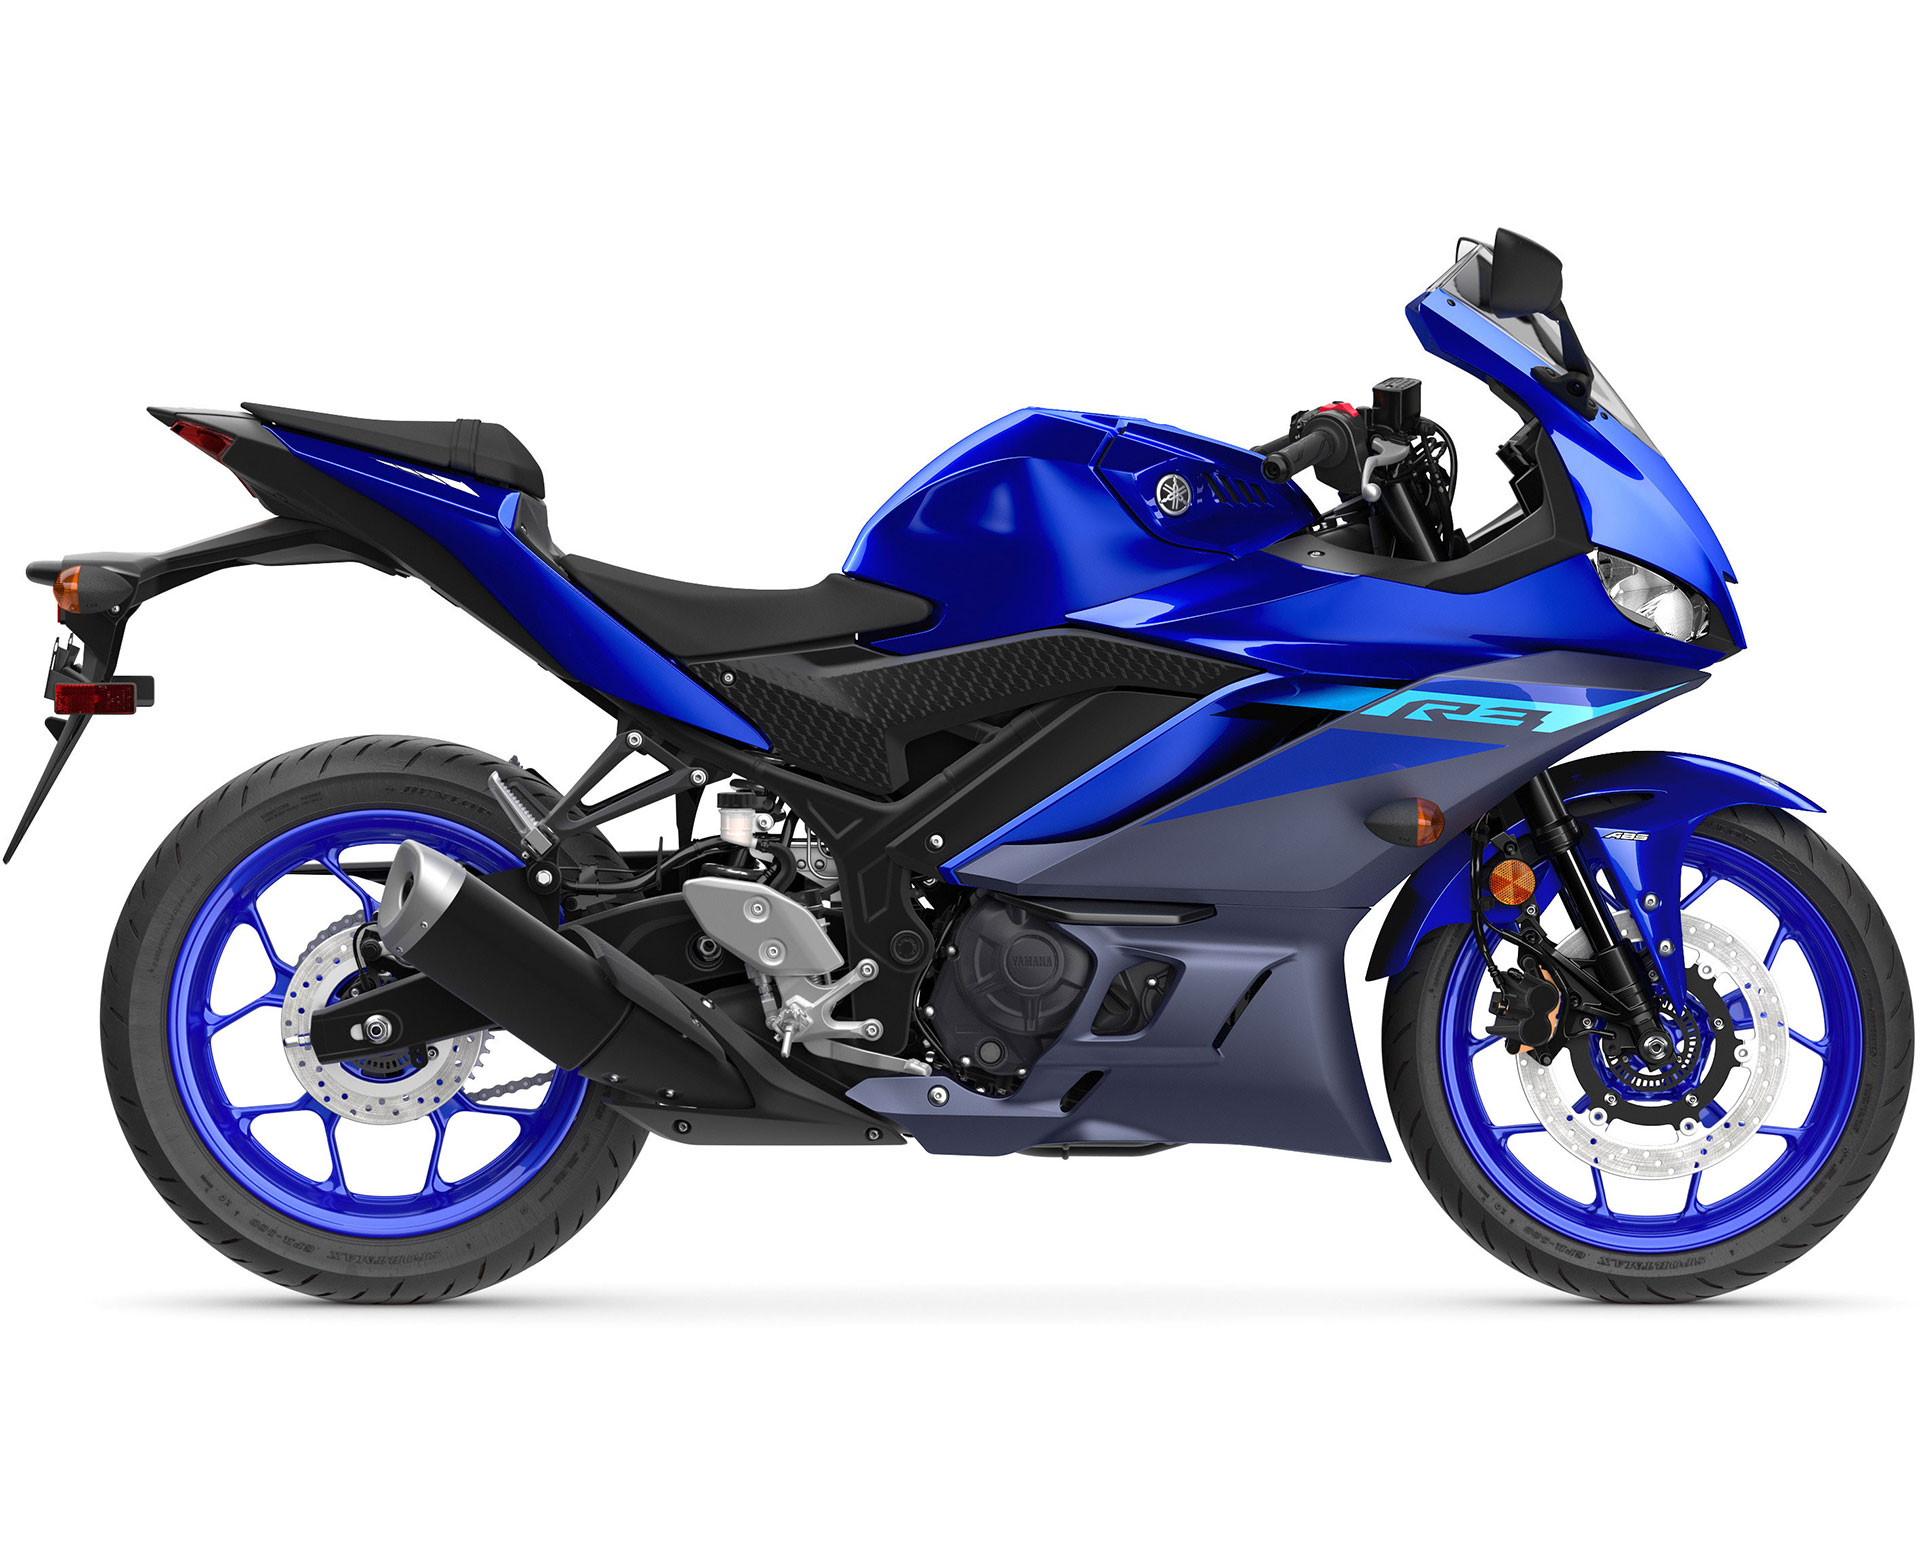 Thumbnail of your customized YZF-R3 2024